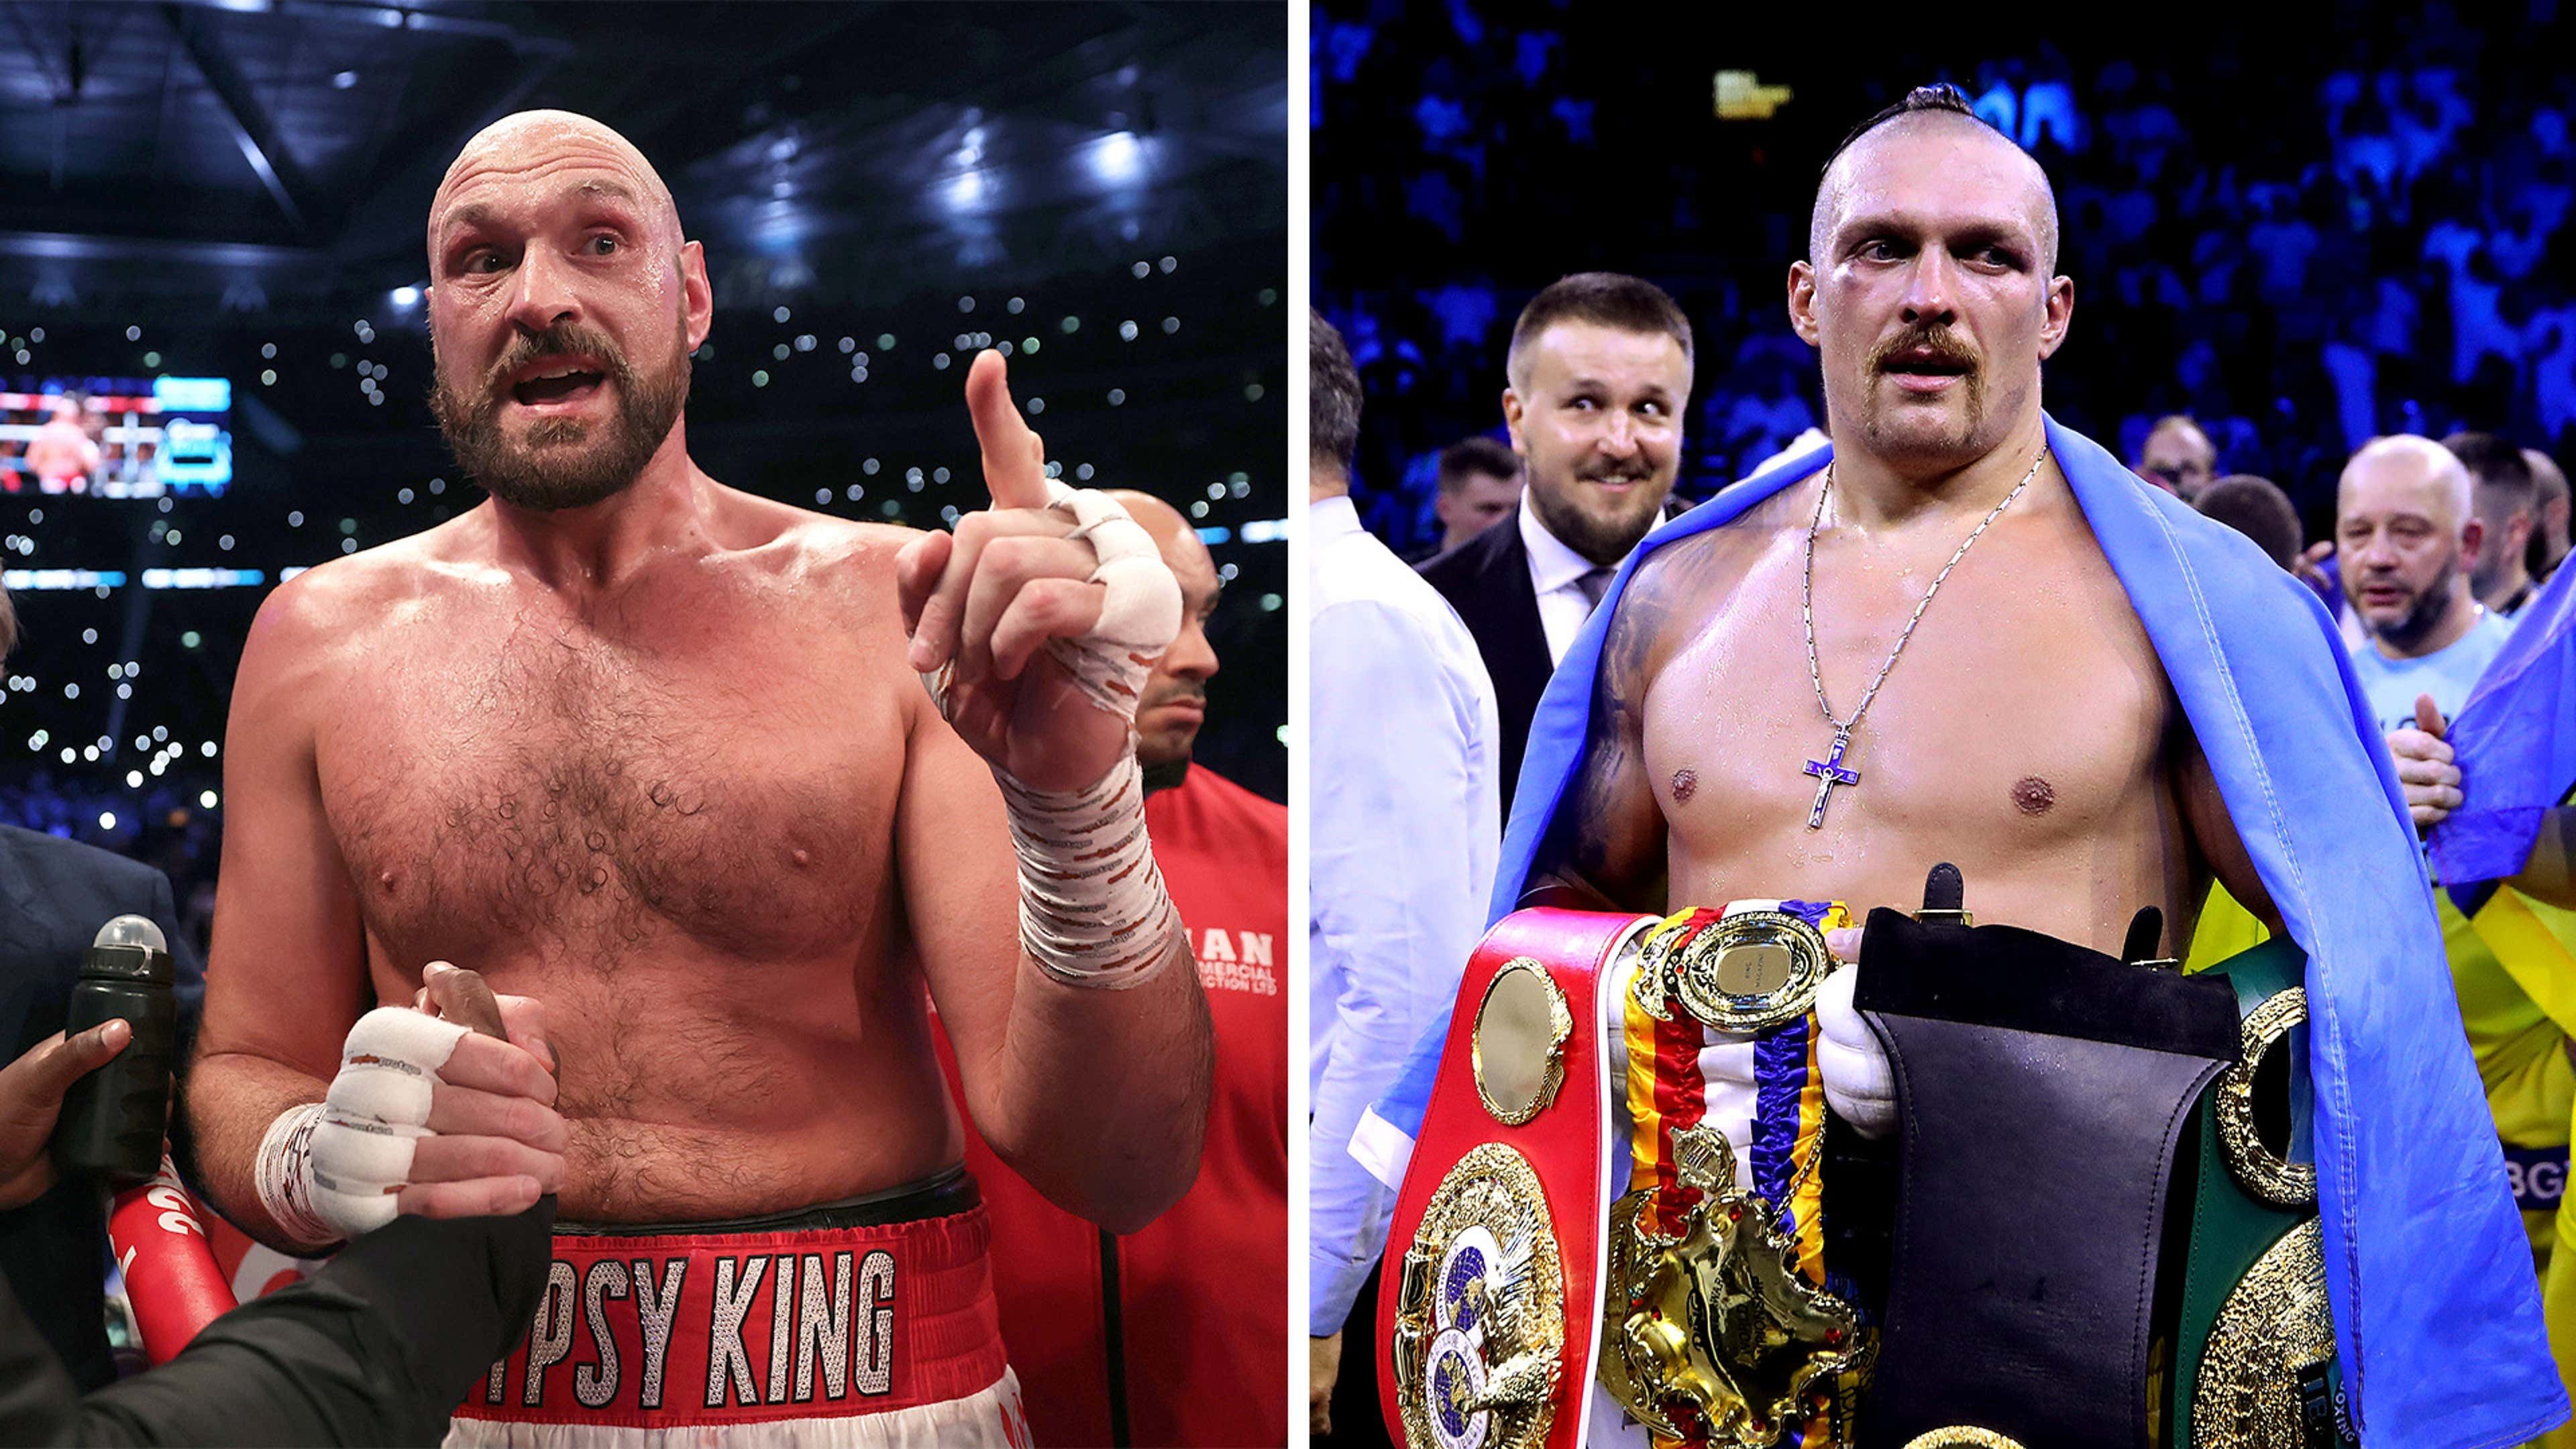 Special Belt Of Undisputed Champion Introduced For Usyk vs Fury Fight